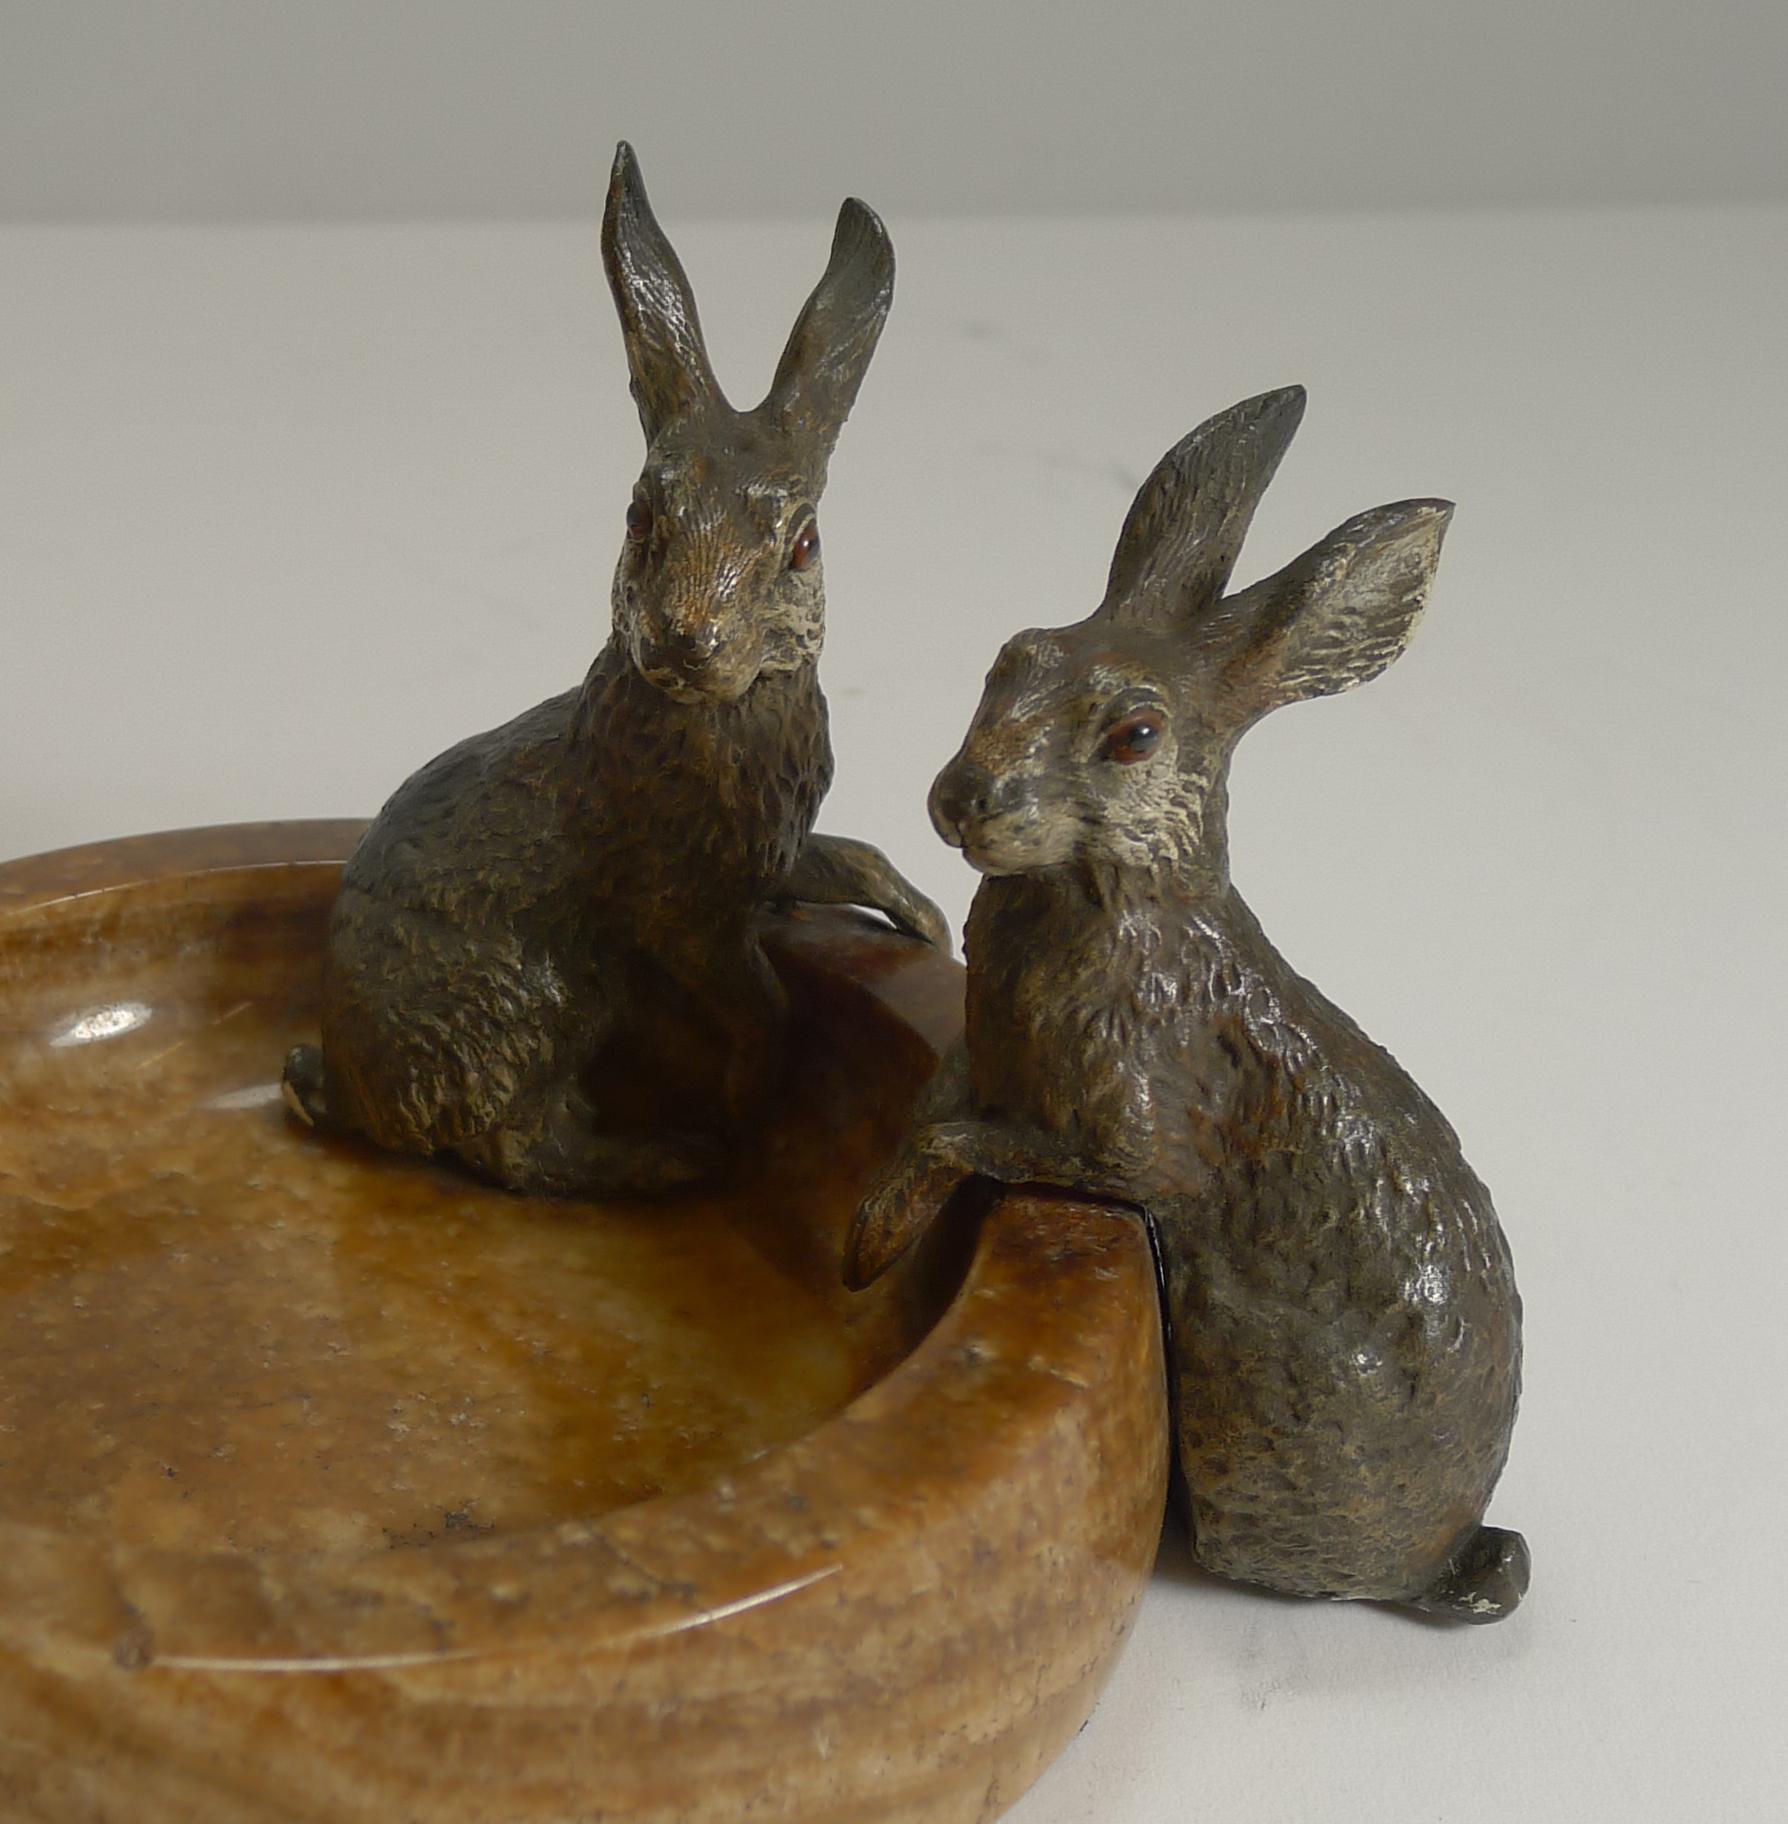 About as charming as they come, this is a rare example of it's kind with two very sweet Rabbits or Hares at the side of this polished stone dish.

One of the figures is sitting inside the dish and the other outside, both beautifully cast with